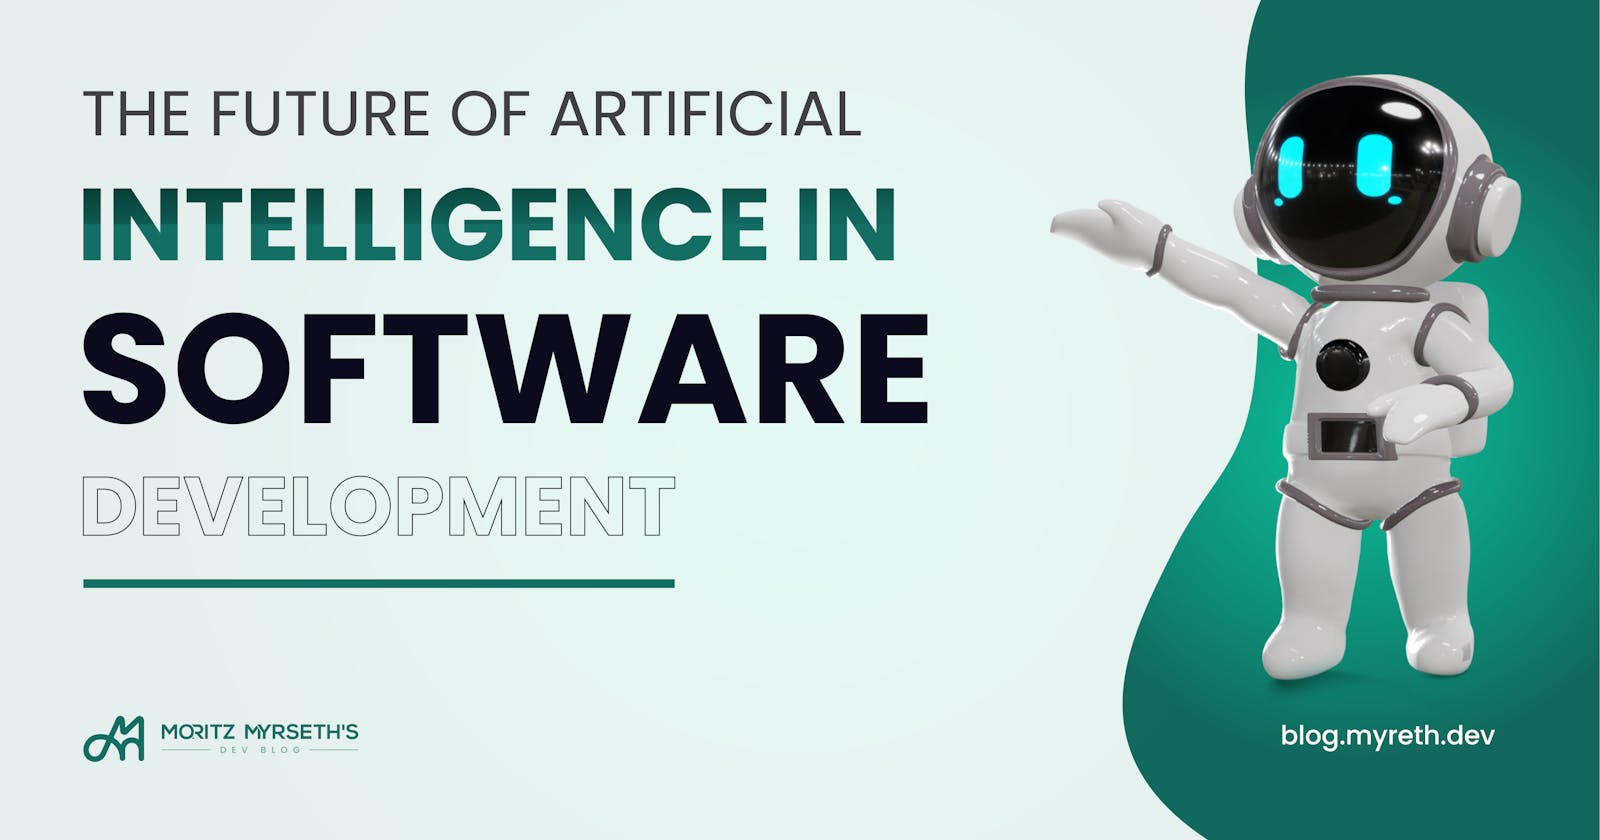 The Future of Artificial Intelligence in Software Development